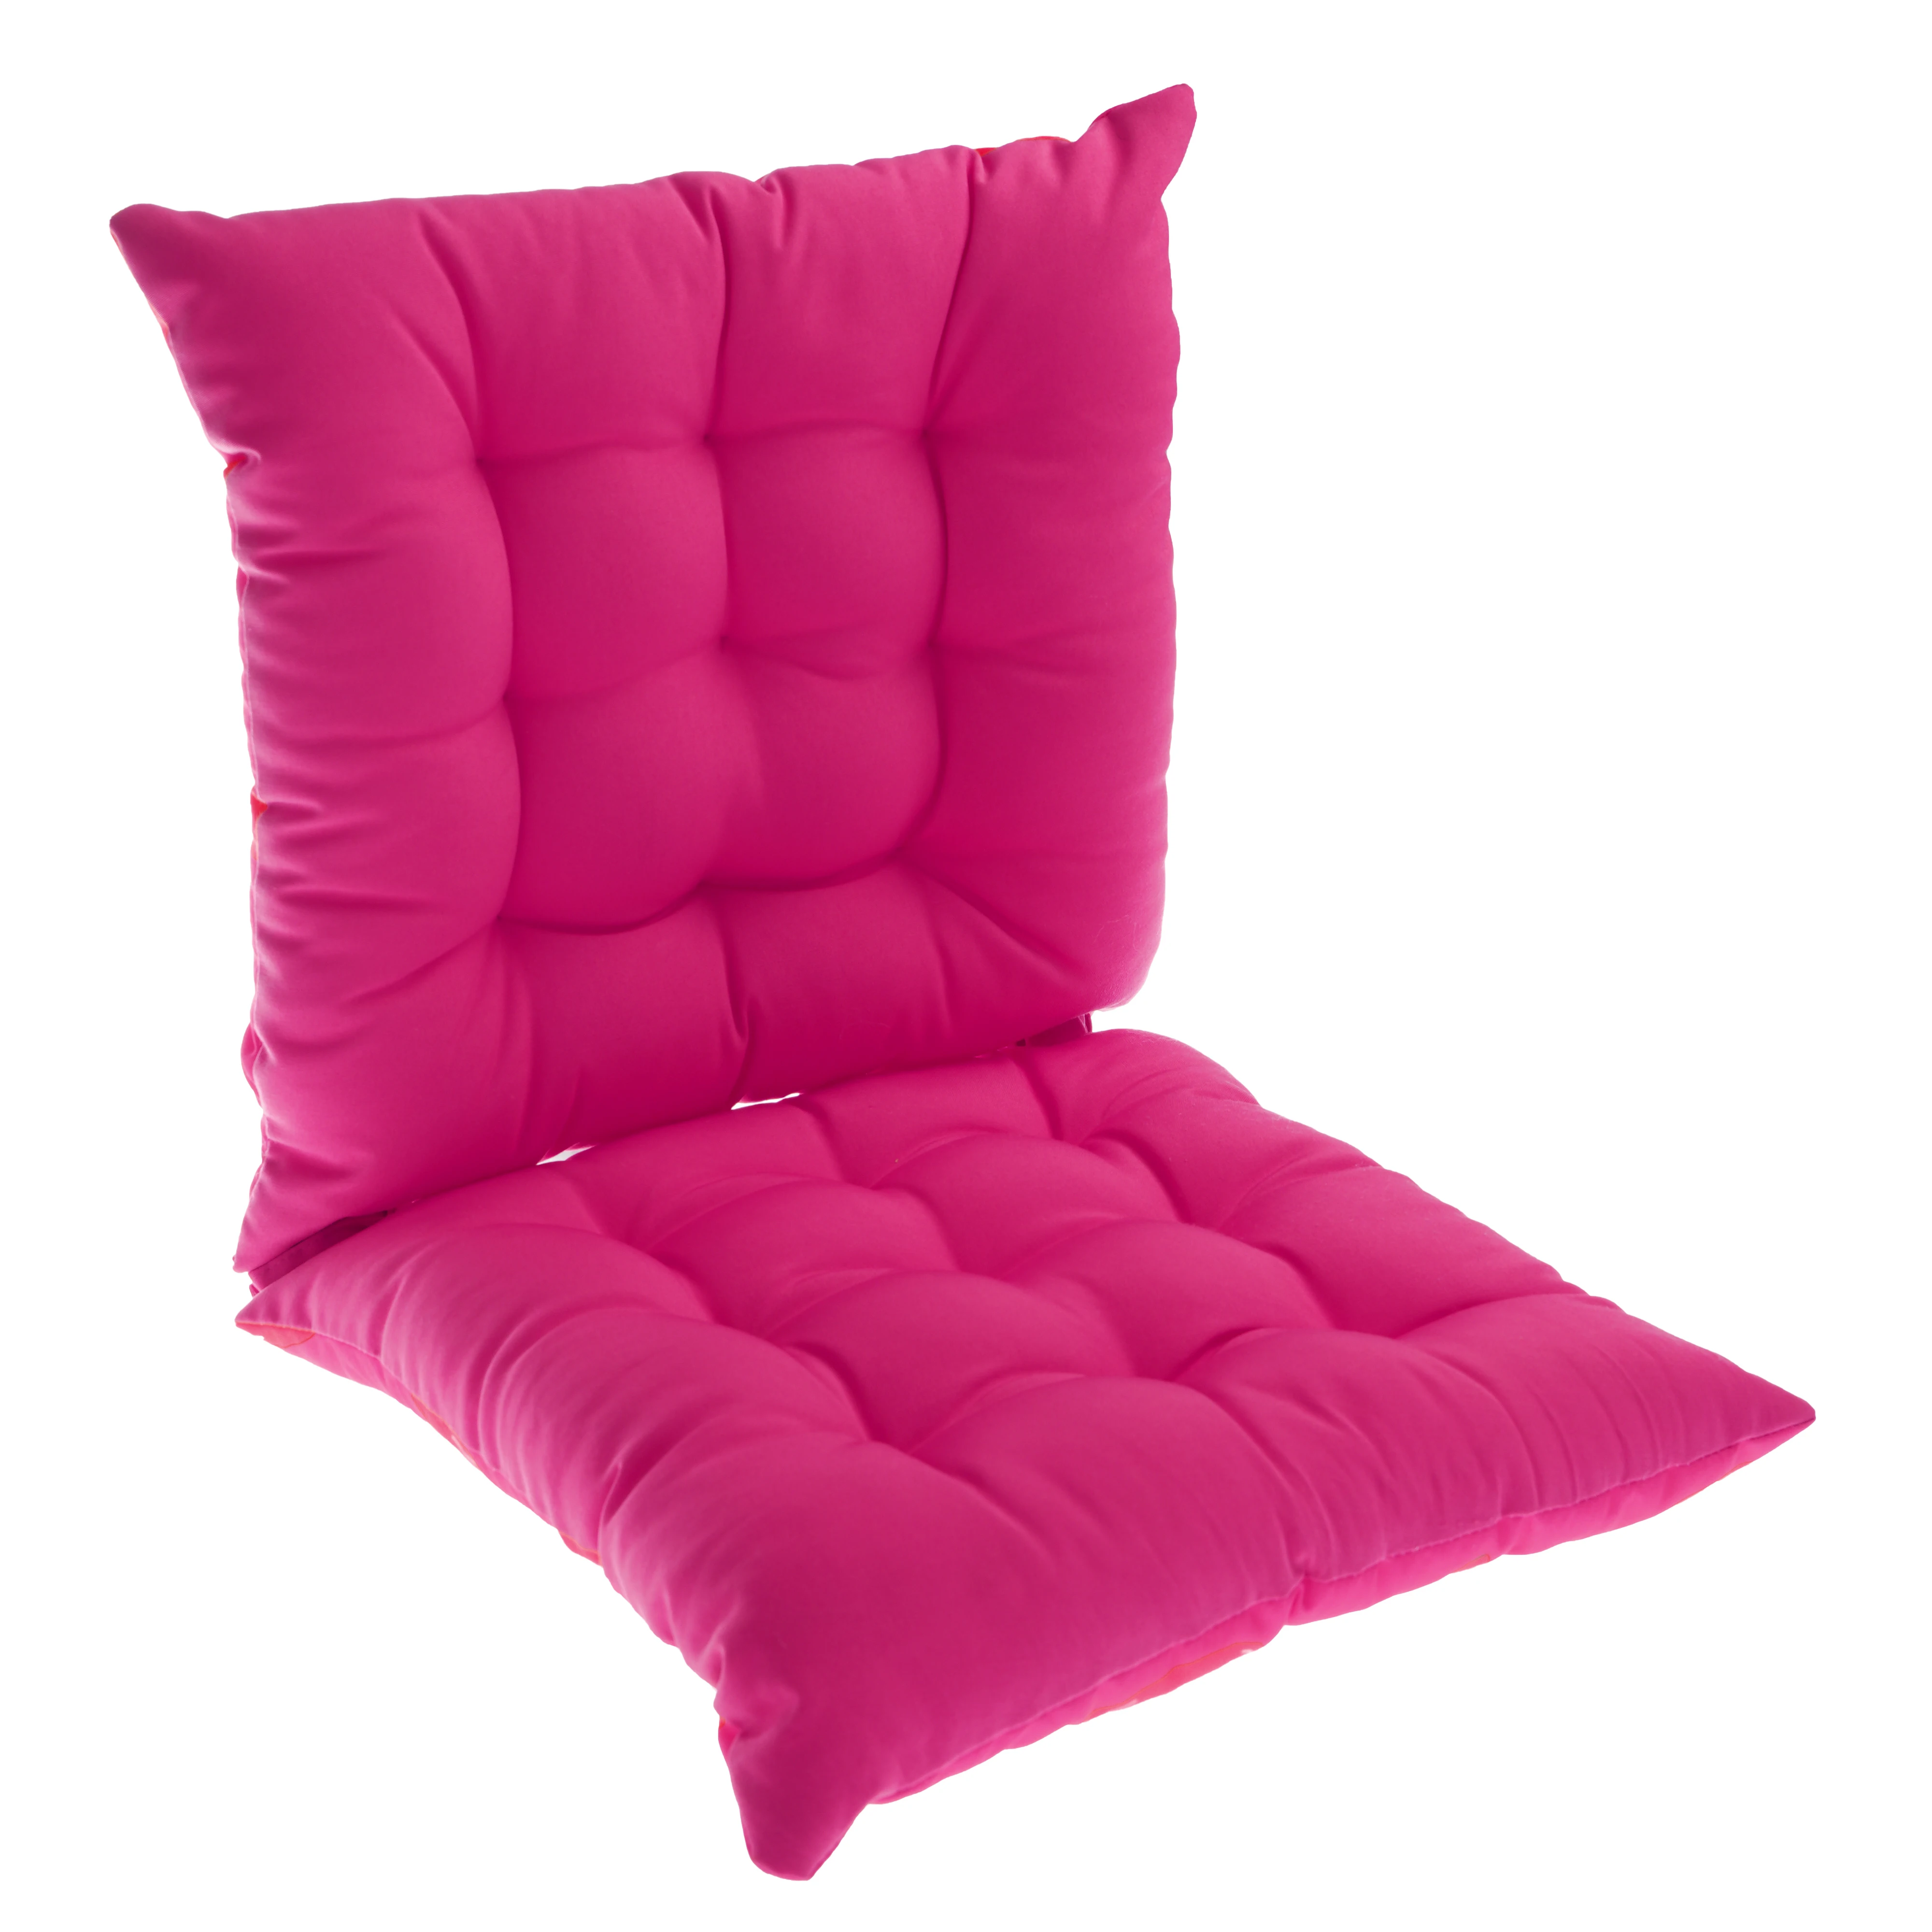 2020 Best Sale Dark Pink Chair Cushions Outdoor Buy Outdoor Seat Cushion